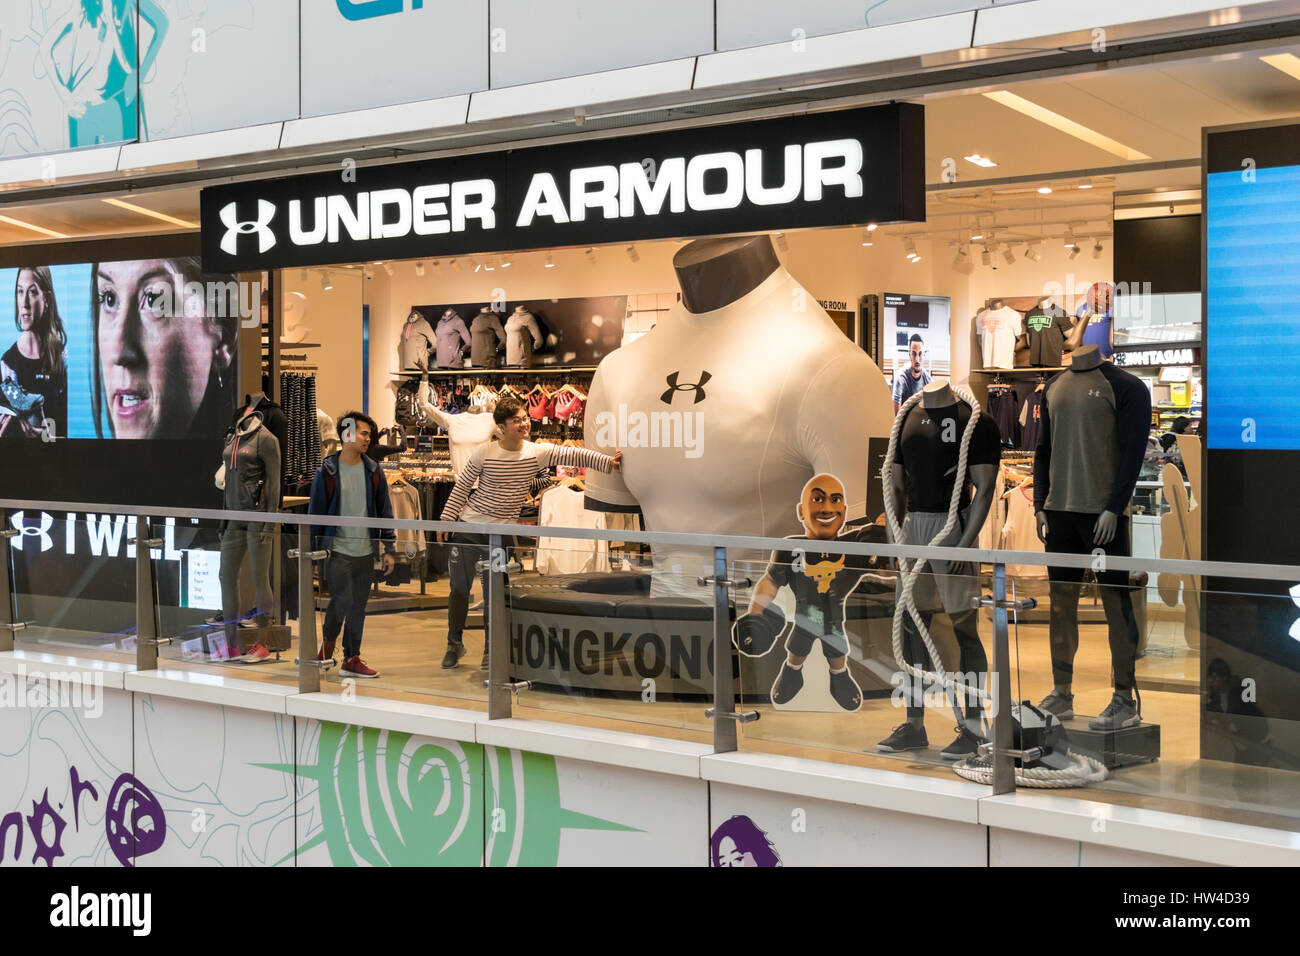 Under Armour Store High Resolution Stock Photography and Images - Alamy